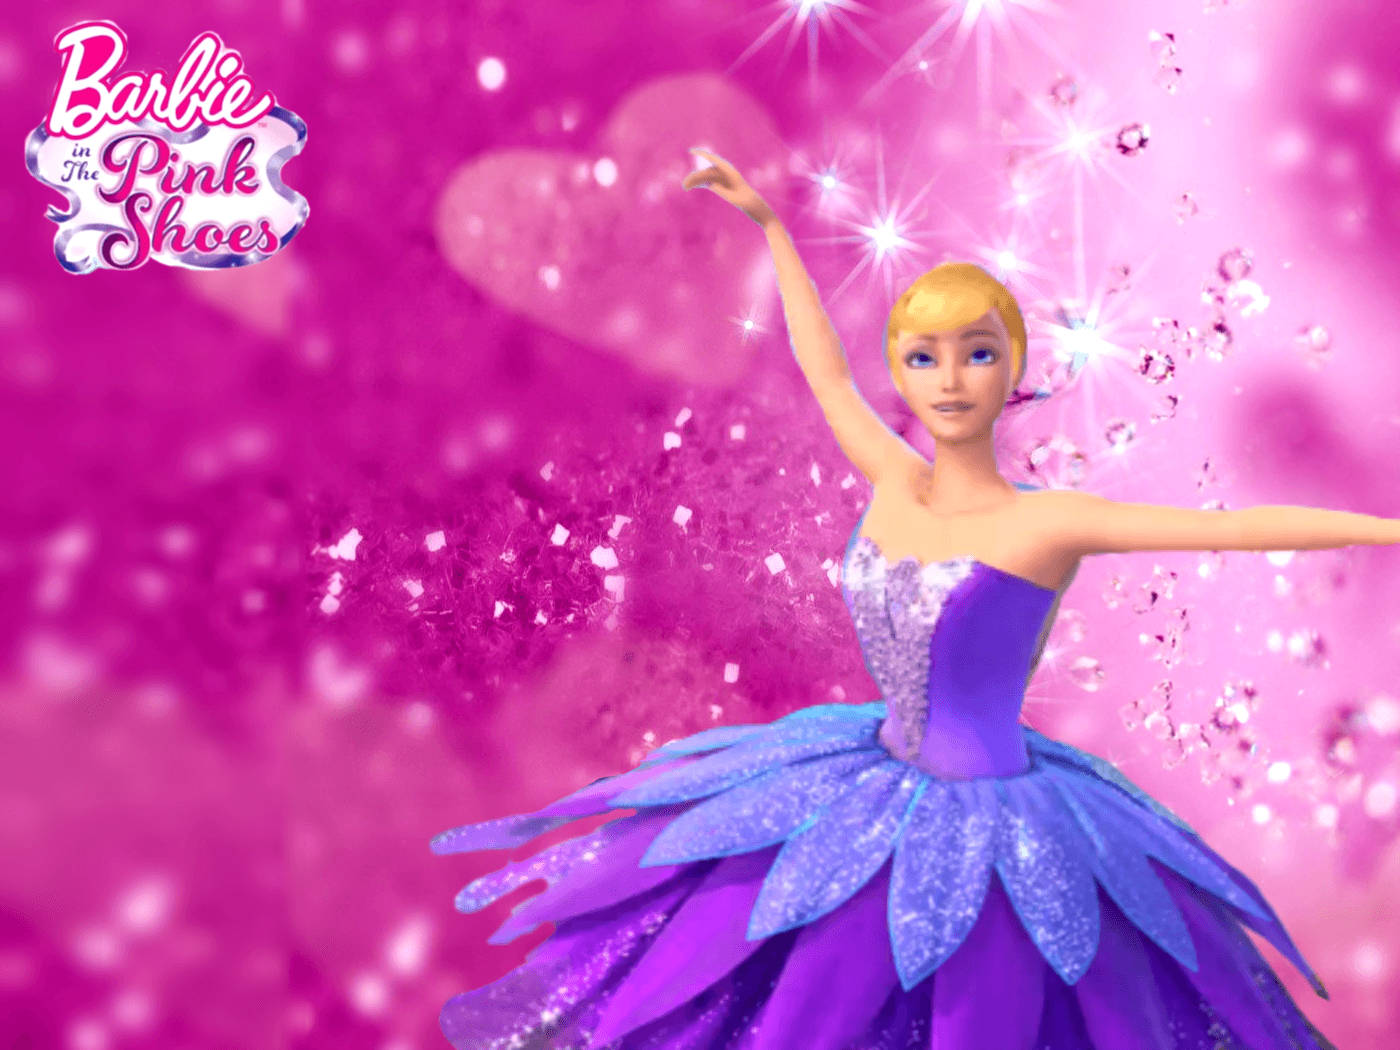 "Barbie dances her way into your heart with her magical pink shoes ballerina performance!" Wallpaper